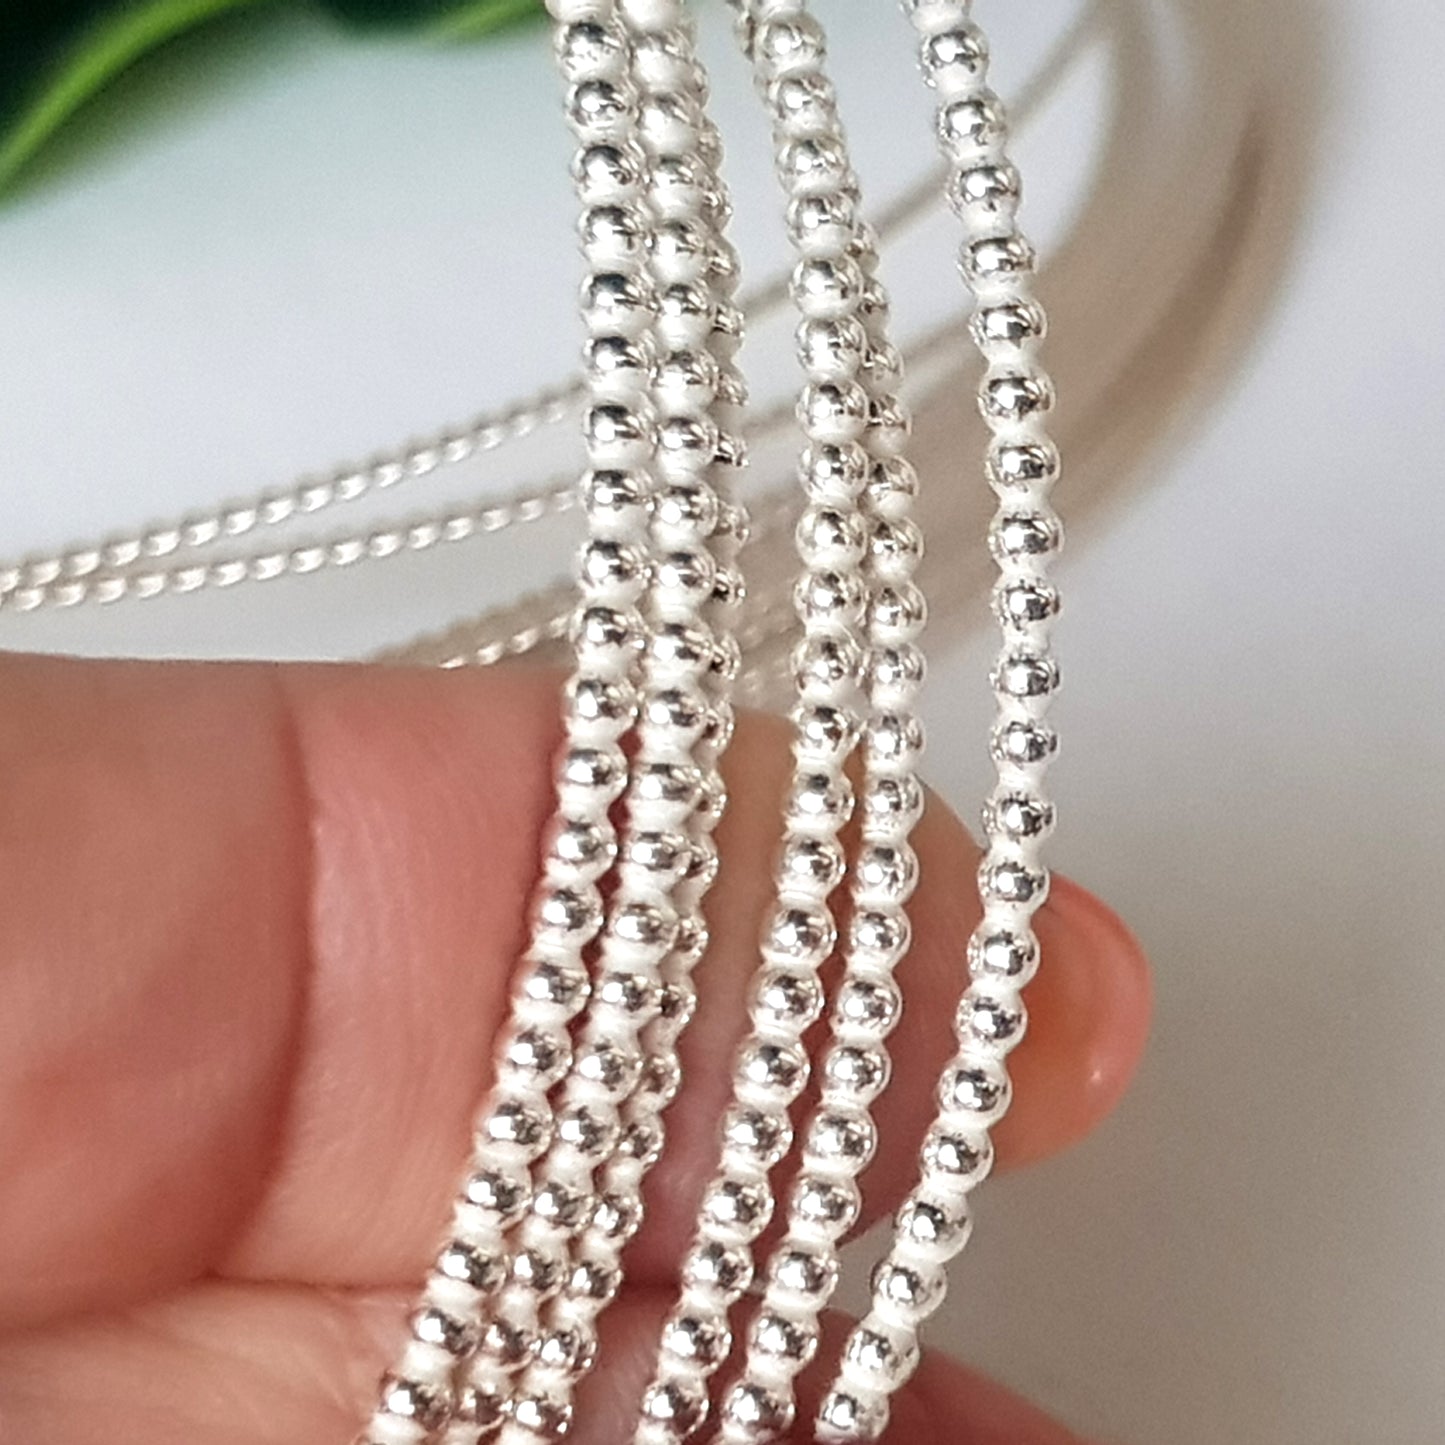 FAB Metal - Pearl Wire - Sterling Silver | SS-PearlW | Jewellery Making Supply